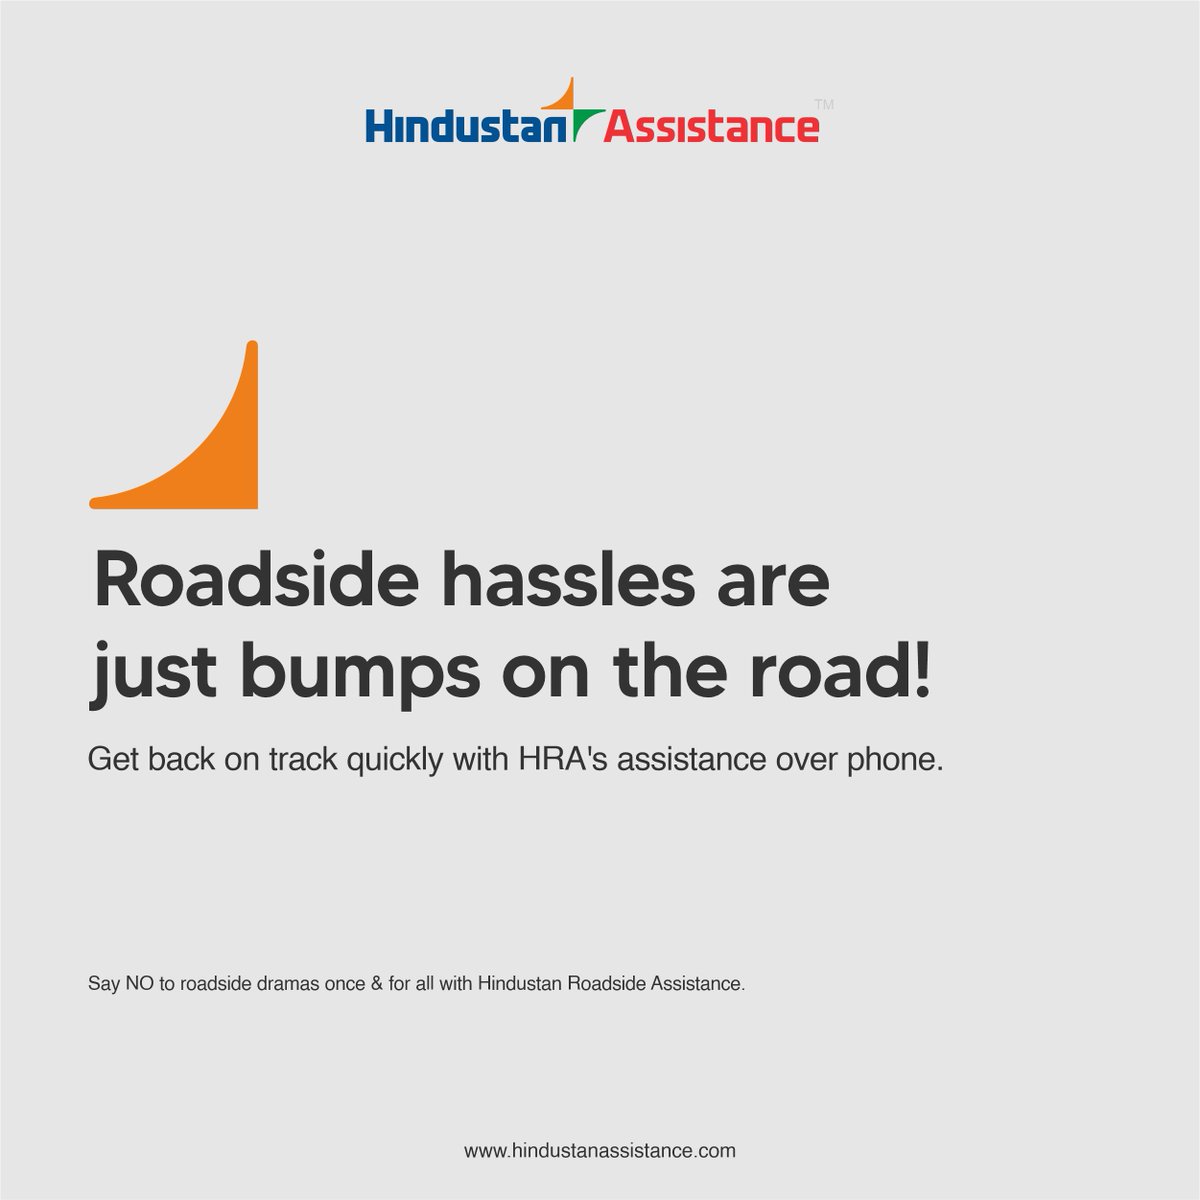 Hit a roadblock on your #journey ? Don't let it turn into a drama! With HRA, receive #expert guidance & #assistance over phone. Say goodbye to roadside dramas & hello to carefree #travel !

#roadsideassistance #urgentassistance
#phonesupport #24hoursupport #NZvsSL #tatamotors